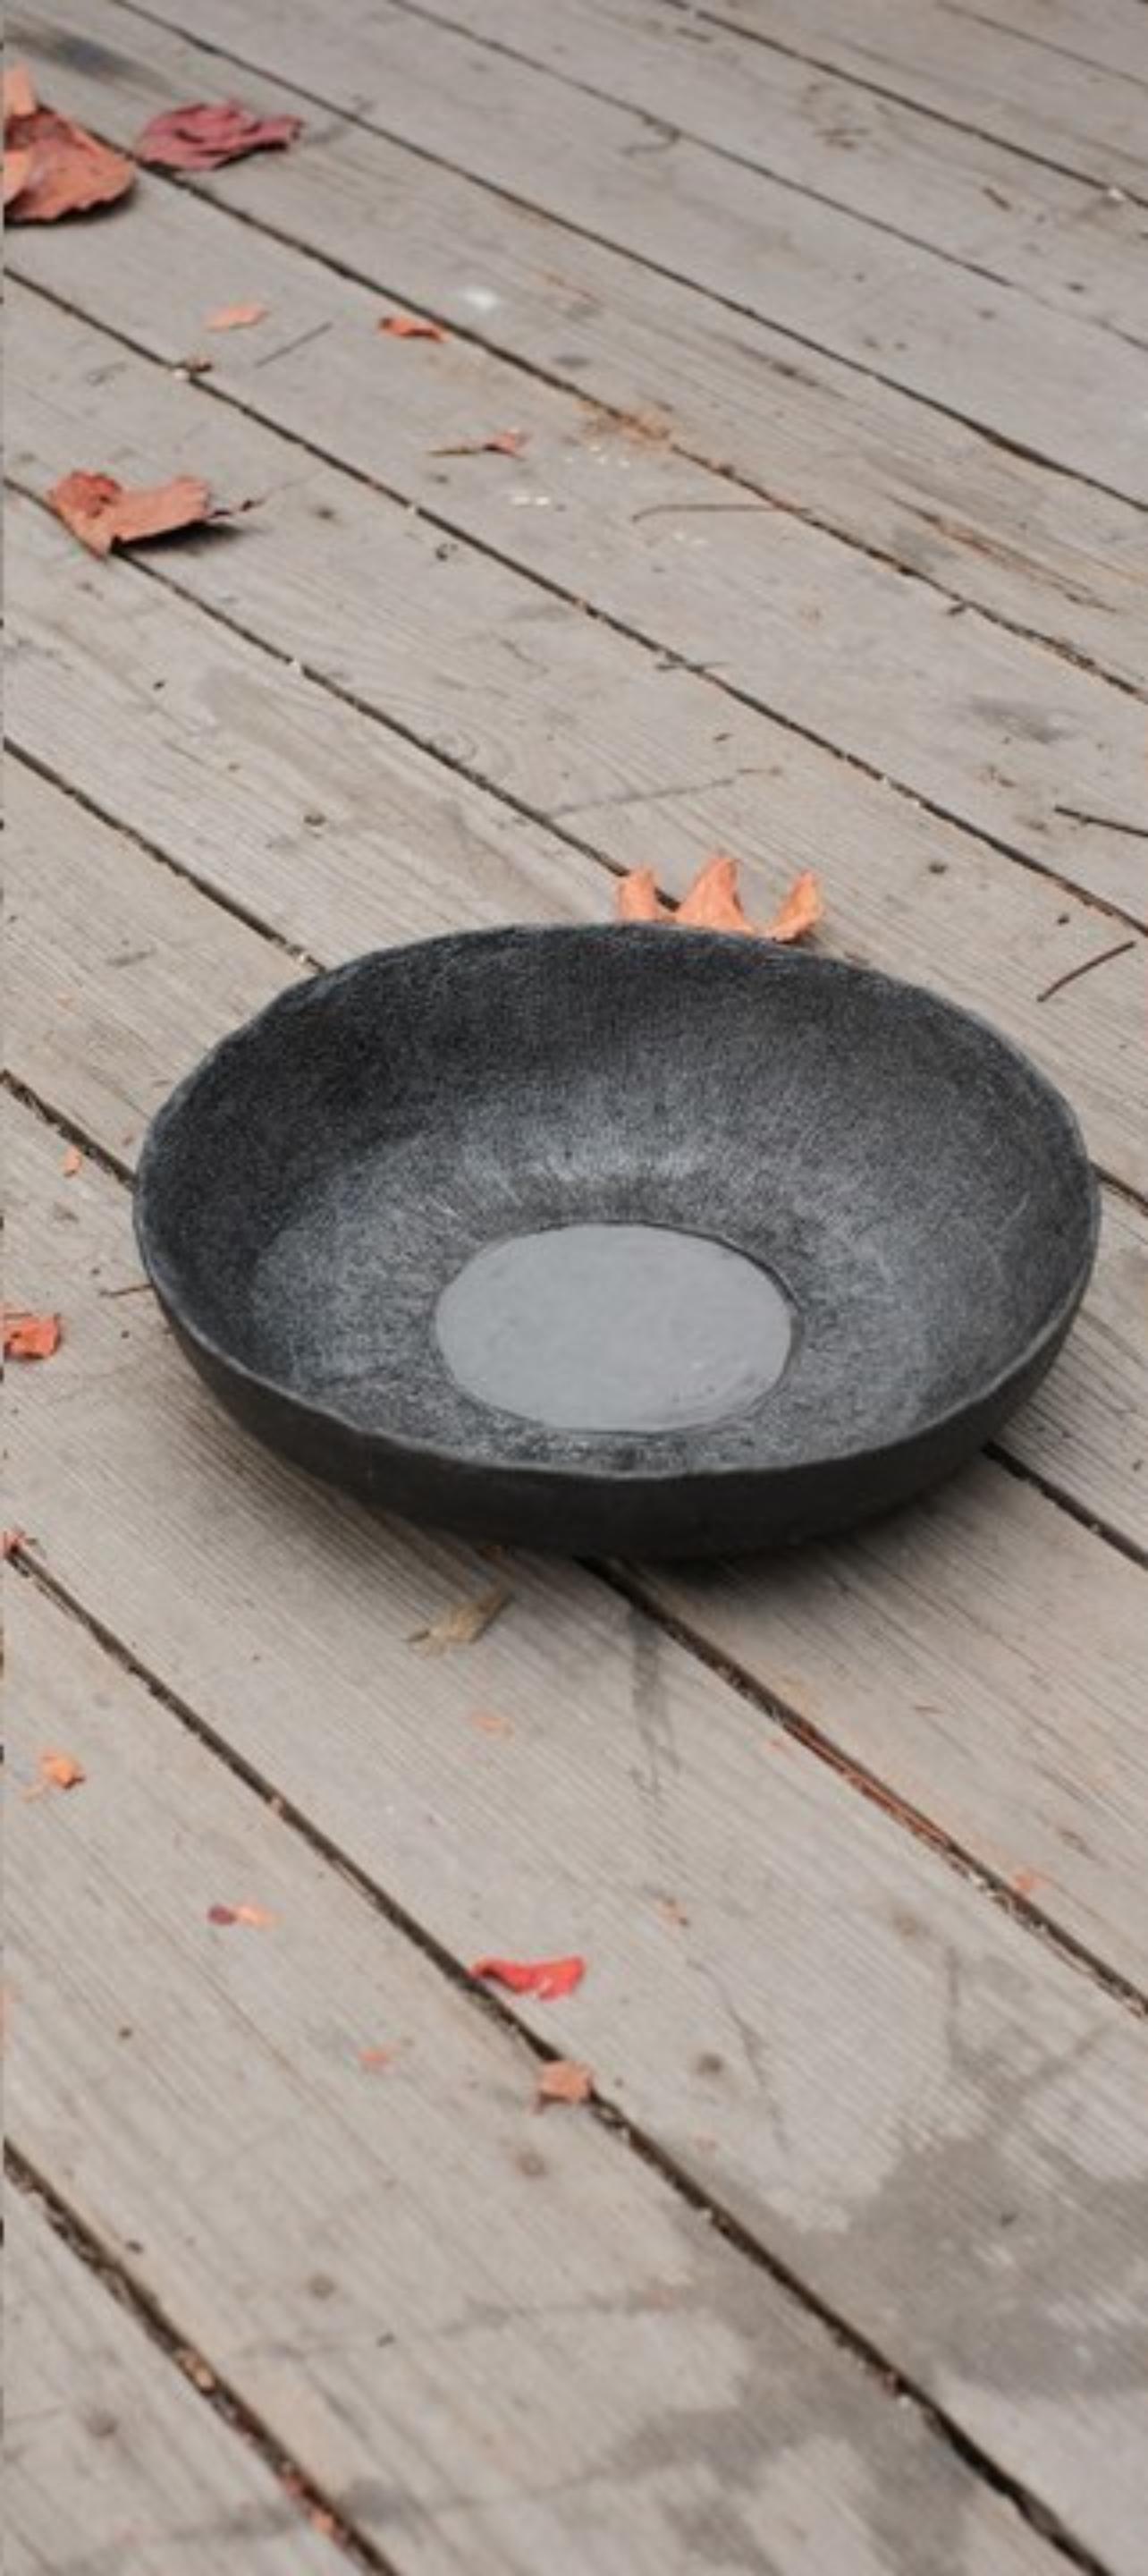 Small, low bowl by Atelier Ledure
Dimensions: D 28 x H 6 cm
Materials: Ceramics - stoneware
Also available: Other variations available.

A Protest Against Polished Stoneware
The BOWLS are the result and expression of a series of experiments